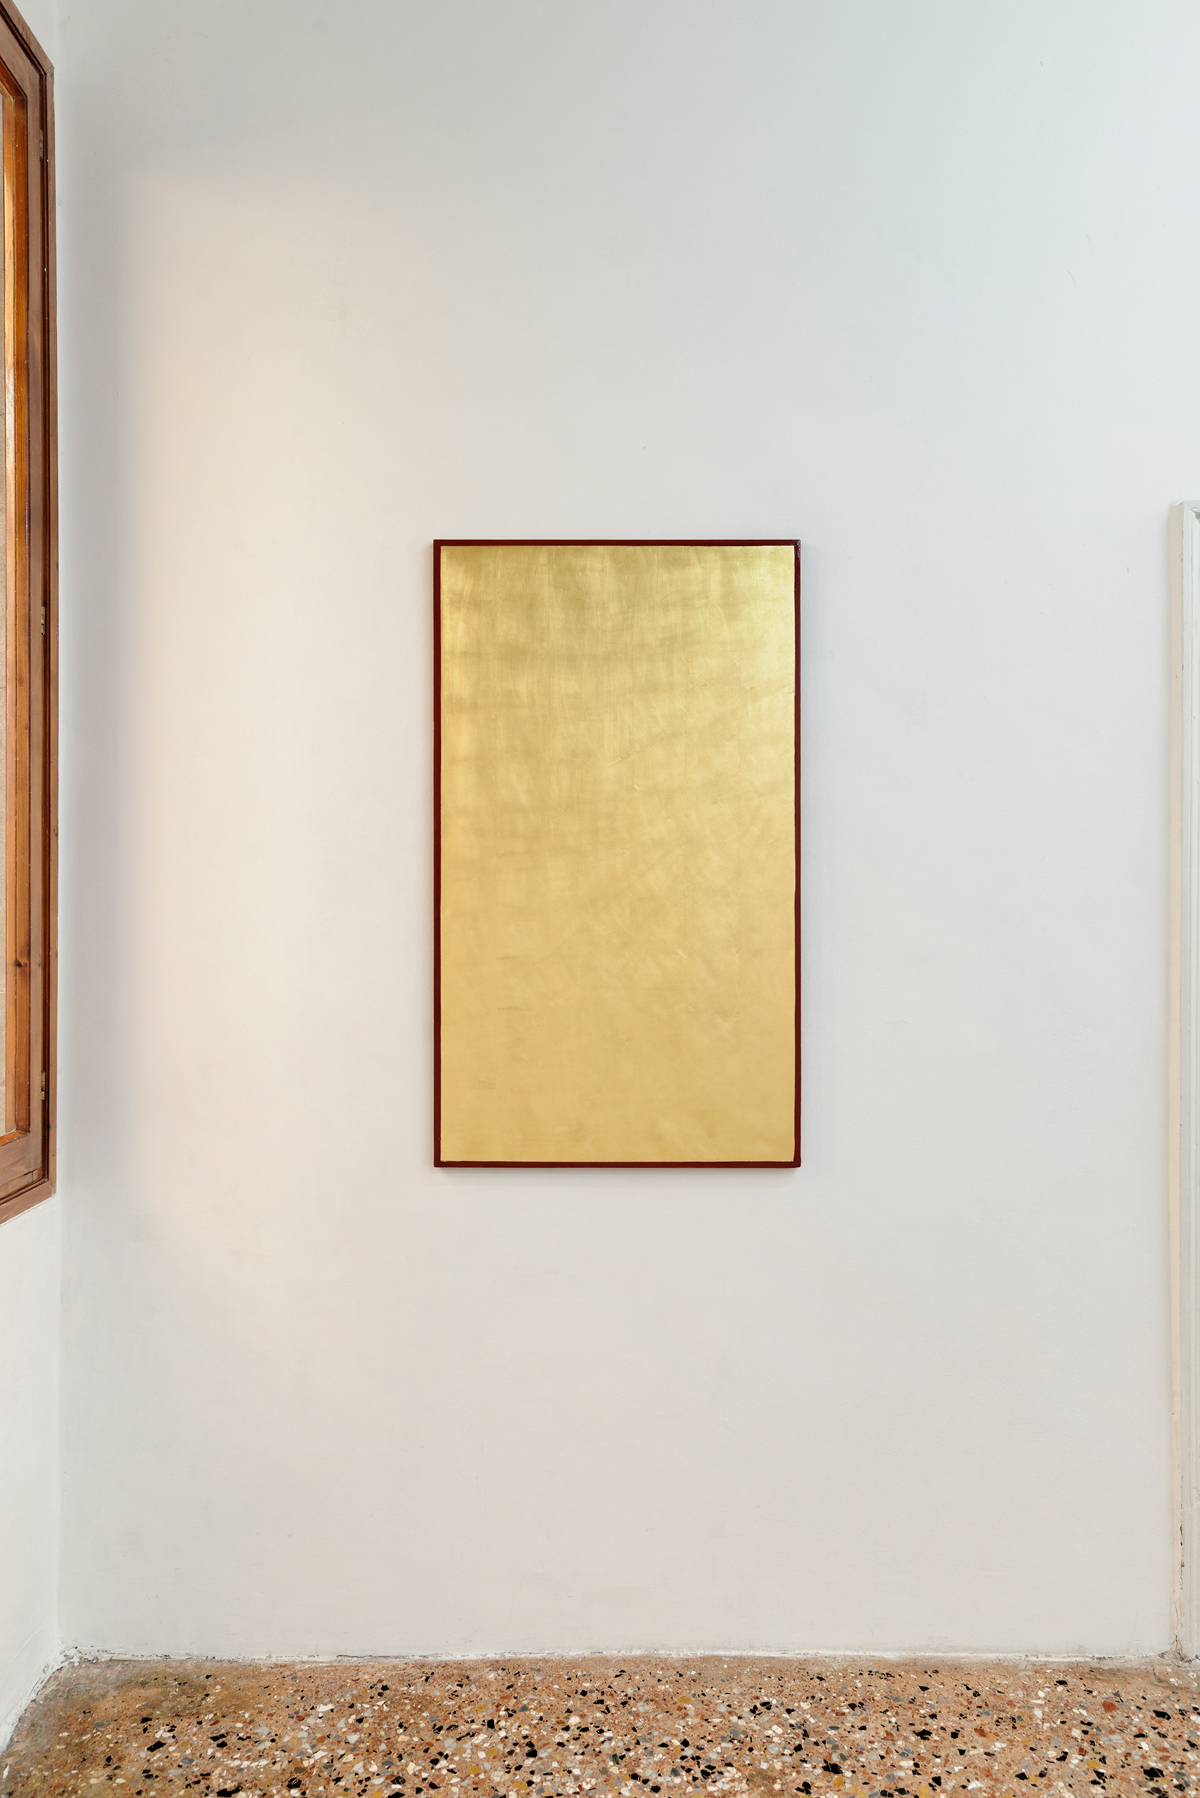 Christodoulos Panayiotou, Untitled, 2015, painting and gold on wood, 85 x 125 cm. Two Days After Forever  – Cyprus Pavilion at the 56rd International Art Exhibition – La Biennale di Venezia. Photograph by: Aurélien Mole. 